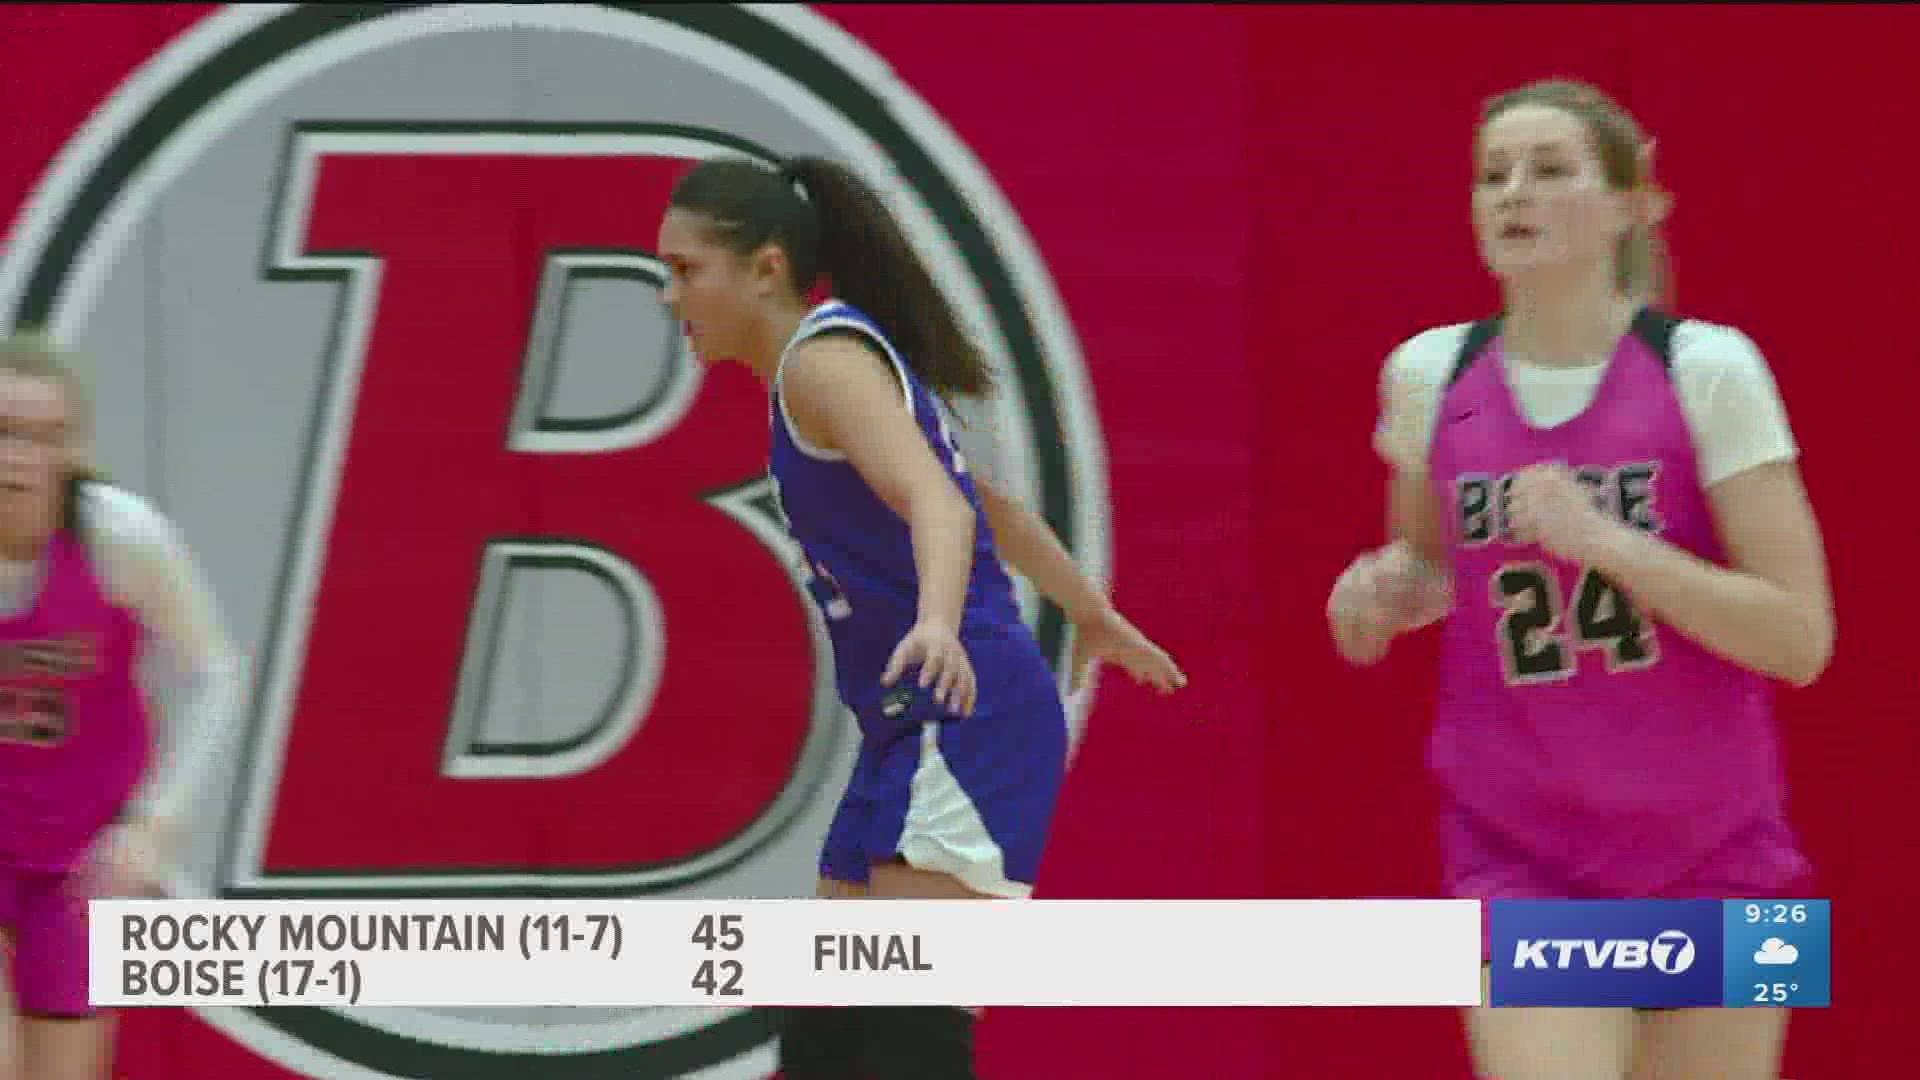 The Grizzlies (12-7) pulled off the 45-42 upset at Boise (17-2) Saturday night. The Brave hosted their 14th annual Pink Out event for breast cancer awareness.